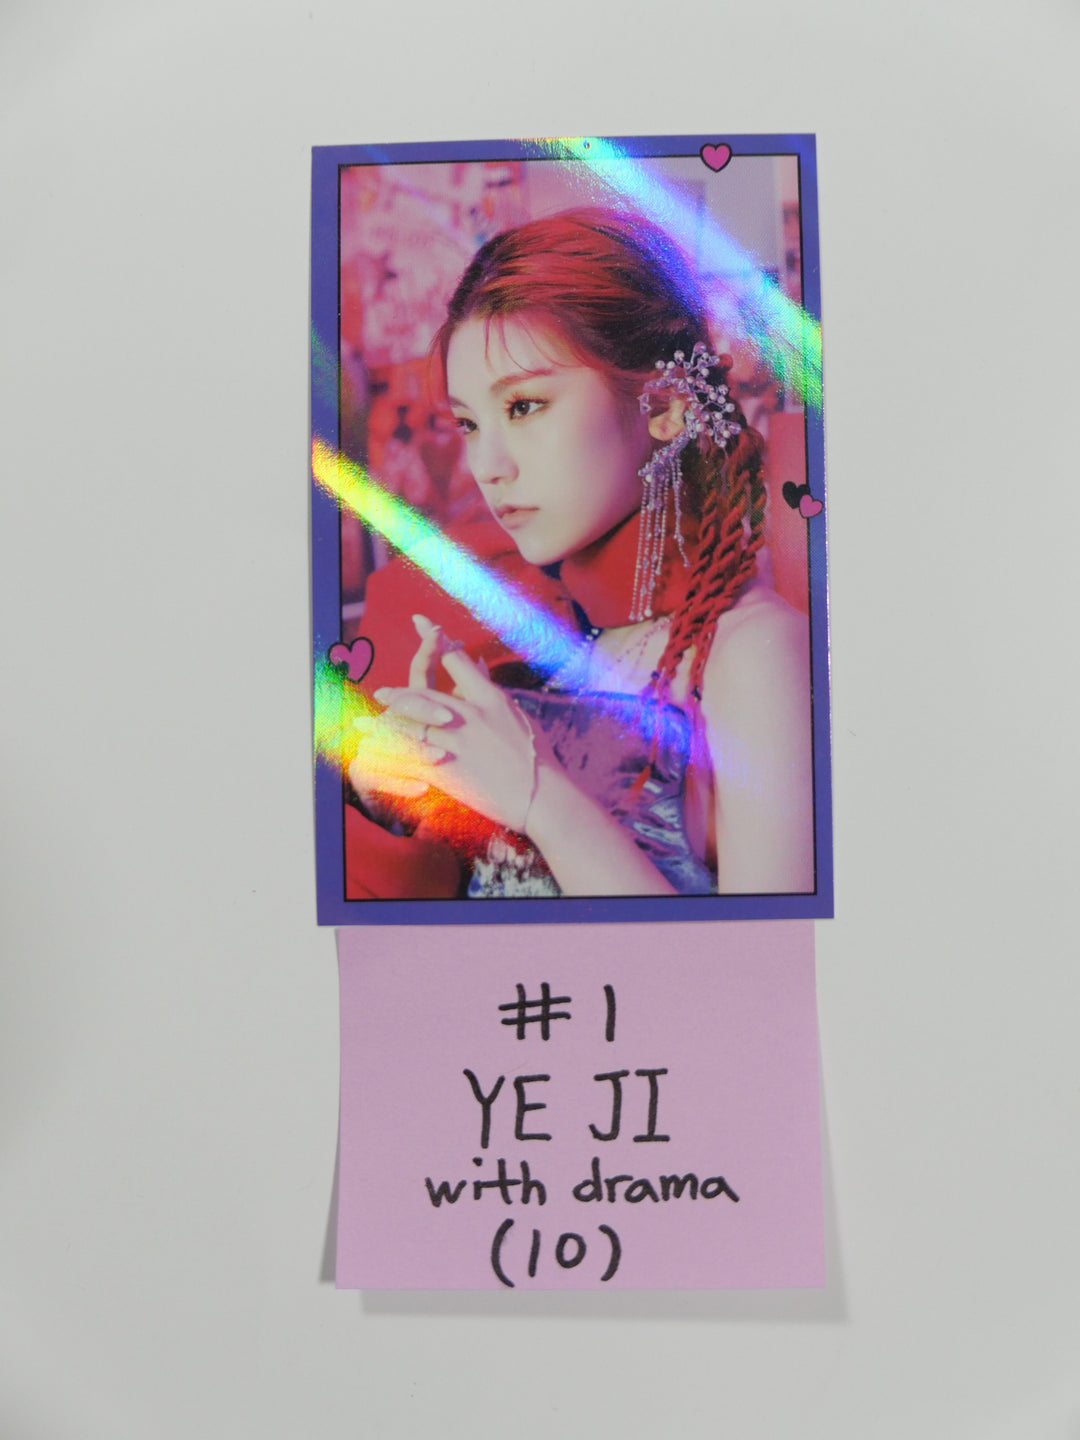 Itzy 'Guess Who' - Withdrama Pre-Order Benefit Hologram Photo Card